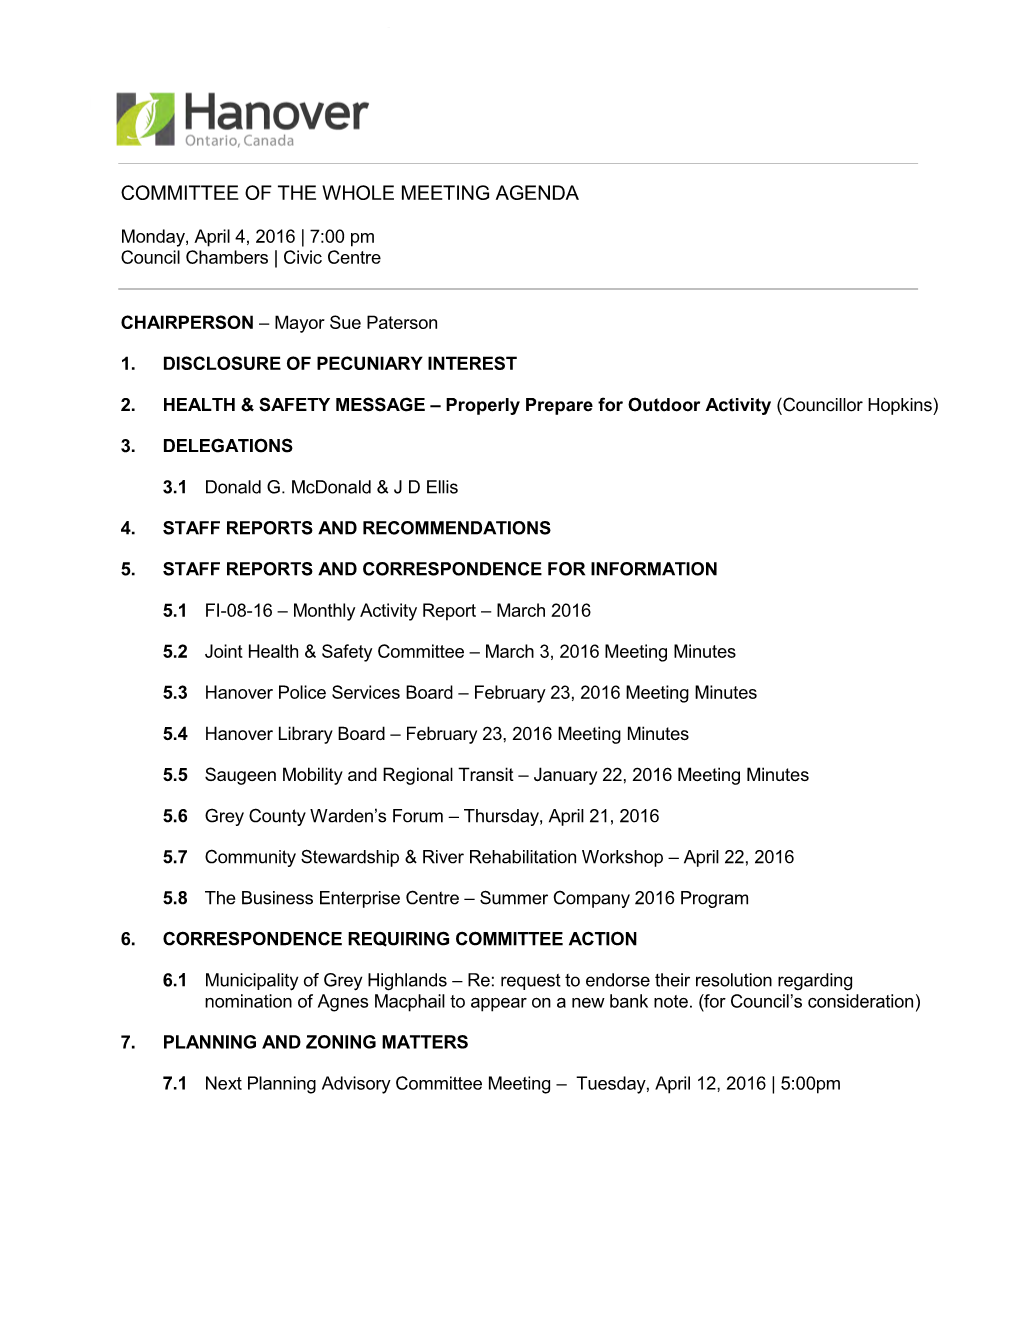 Committee of the Whole Meeting Agenda